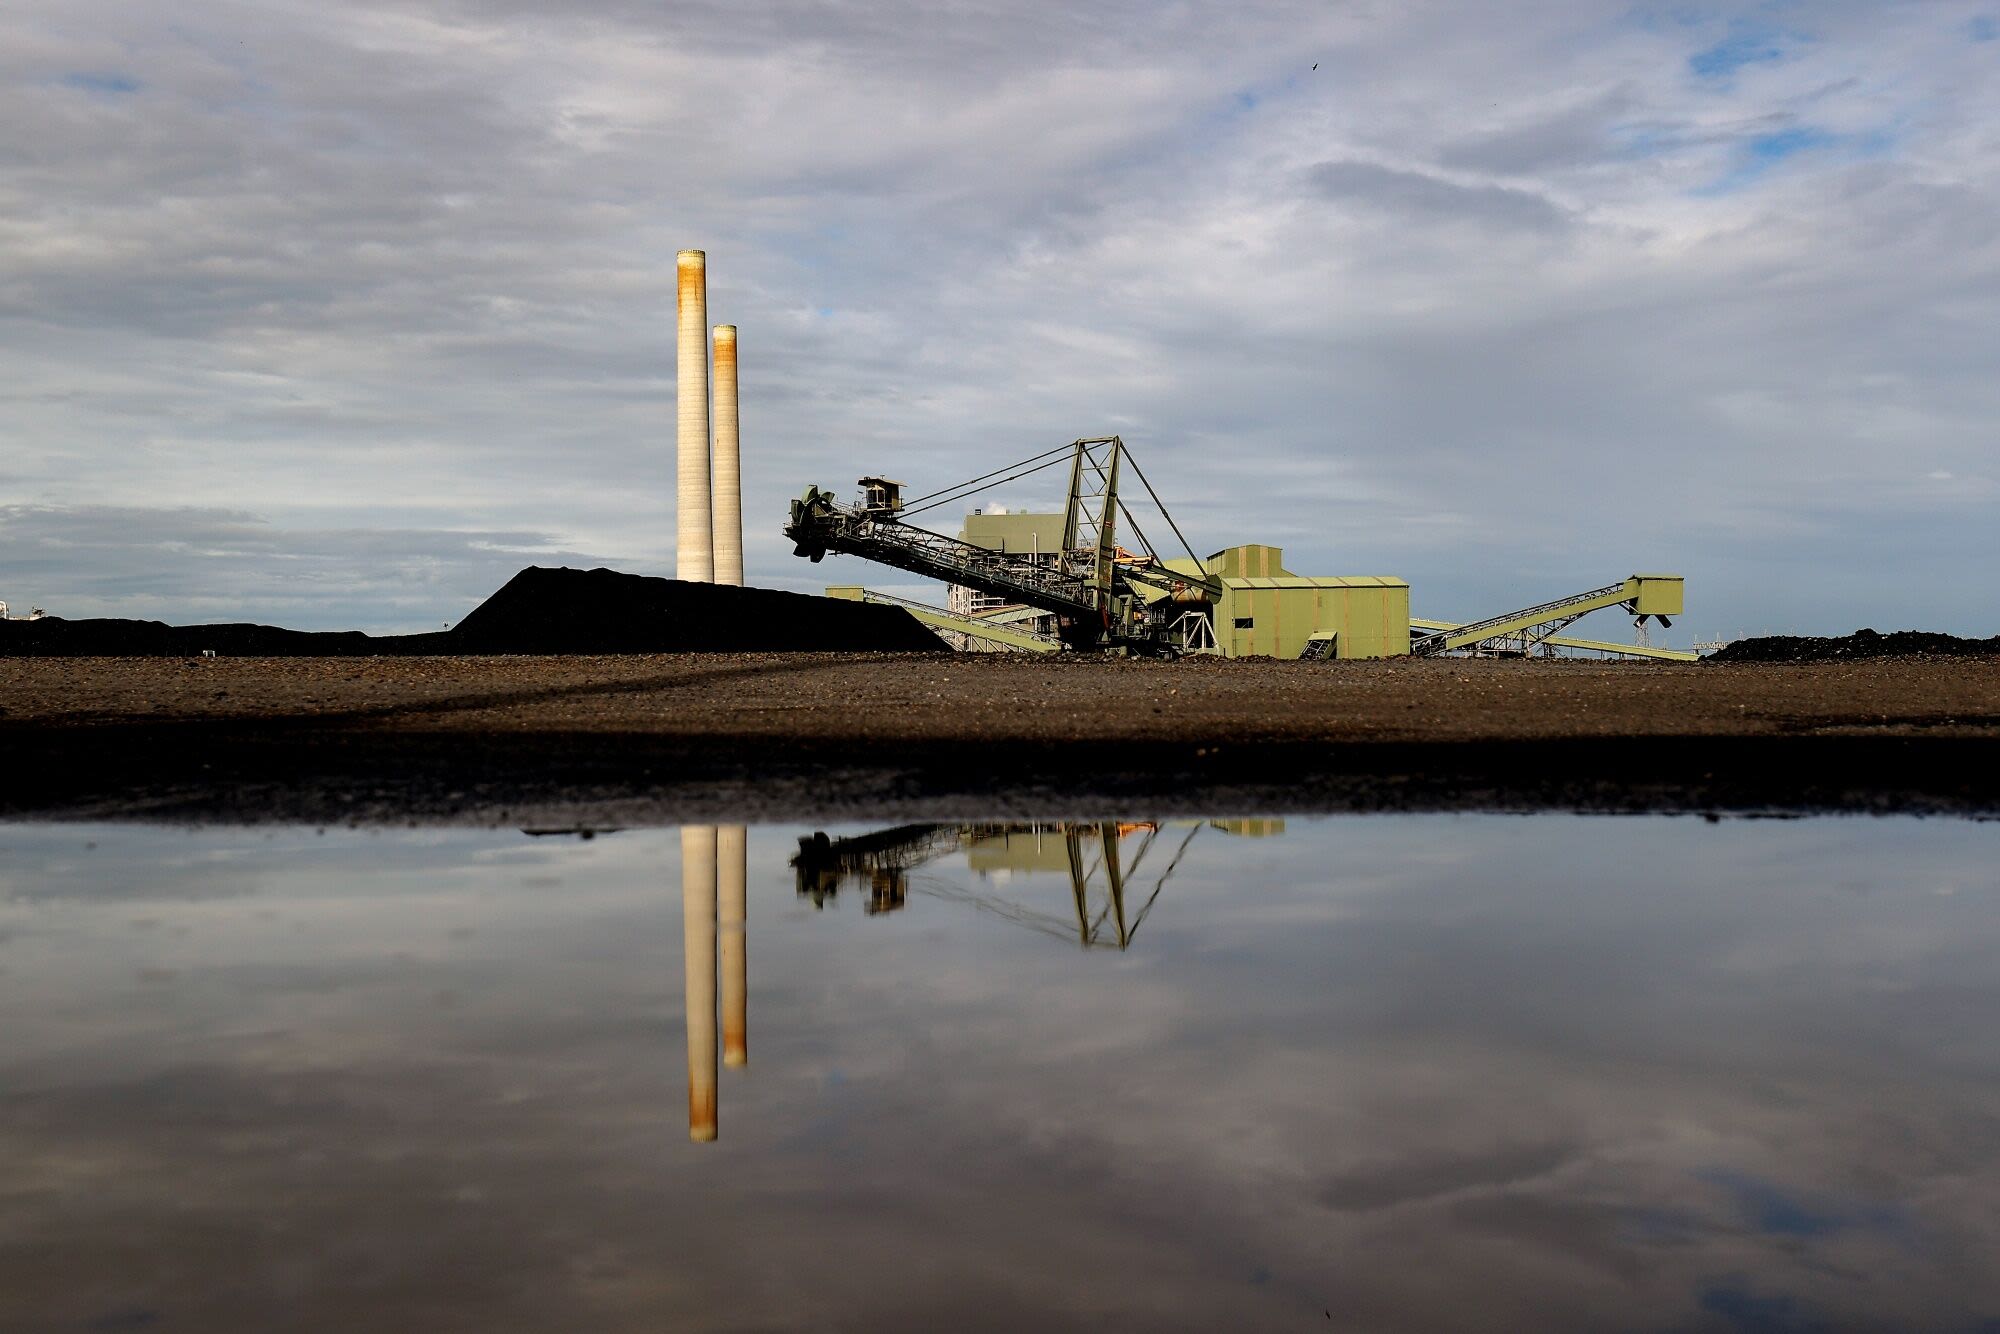 Australia’s Biggest Coal Plant to Delay Closure by Two Years